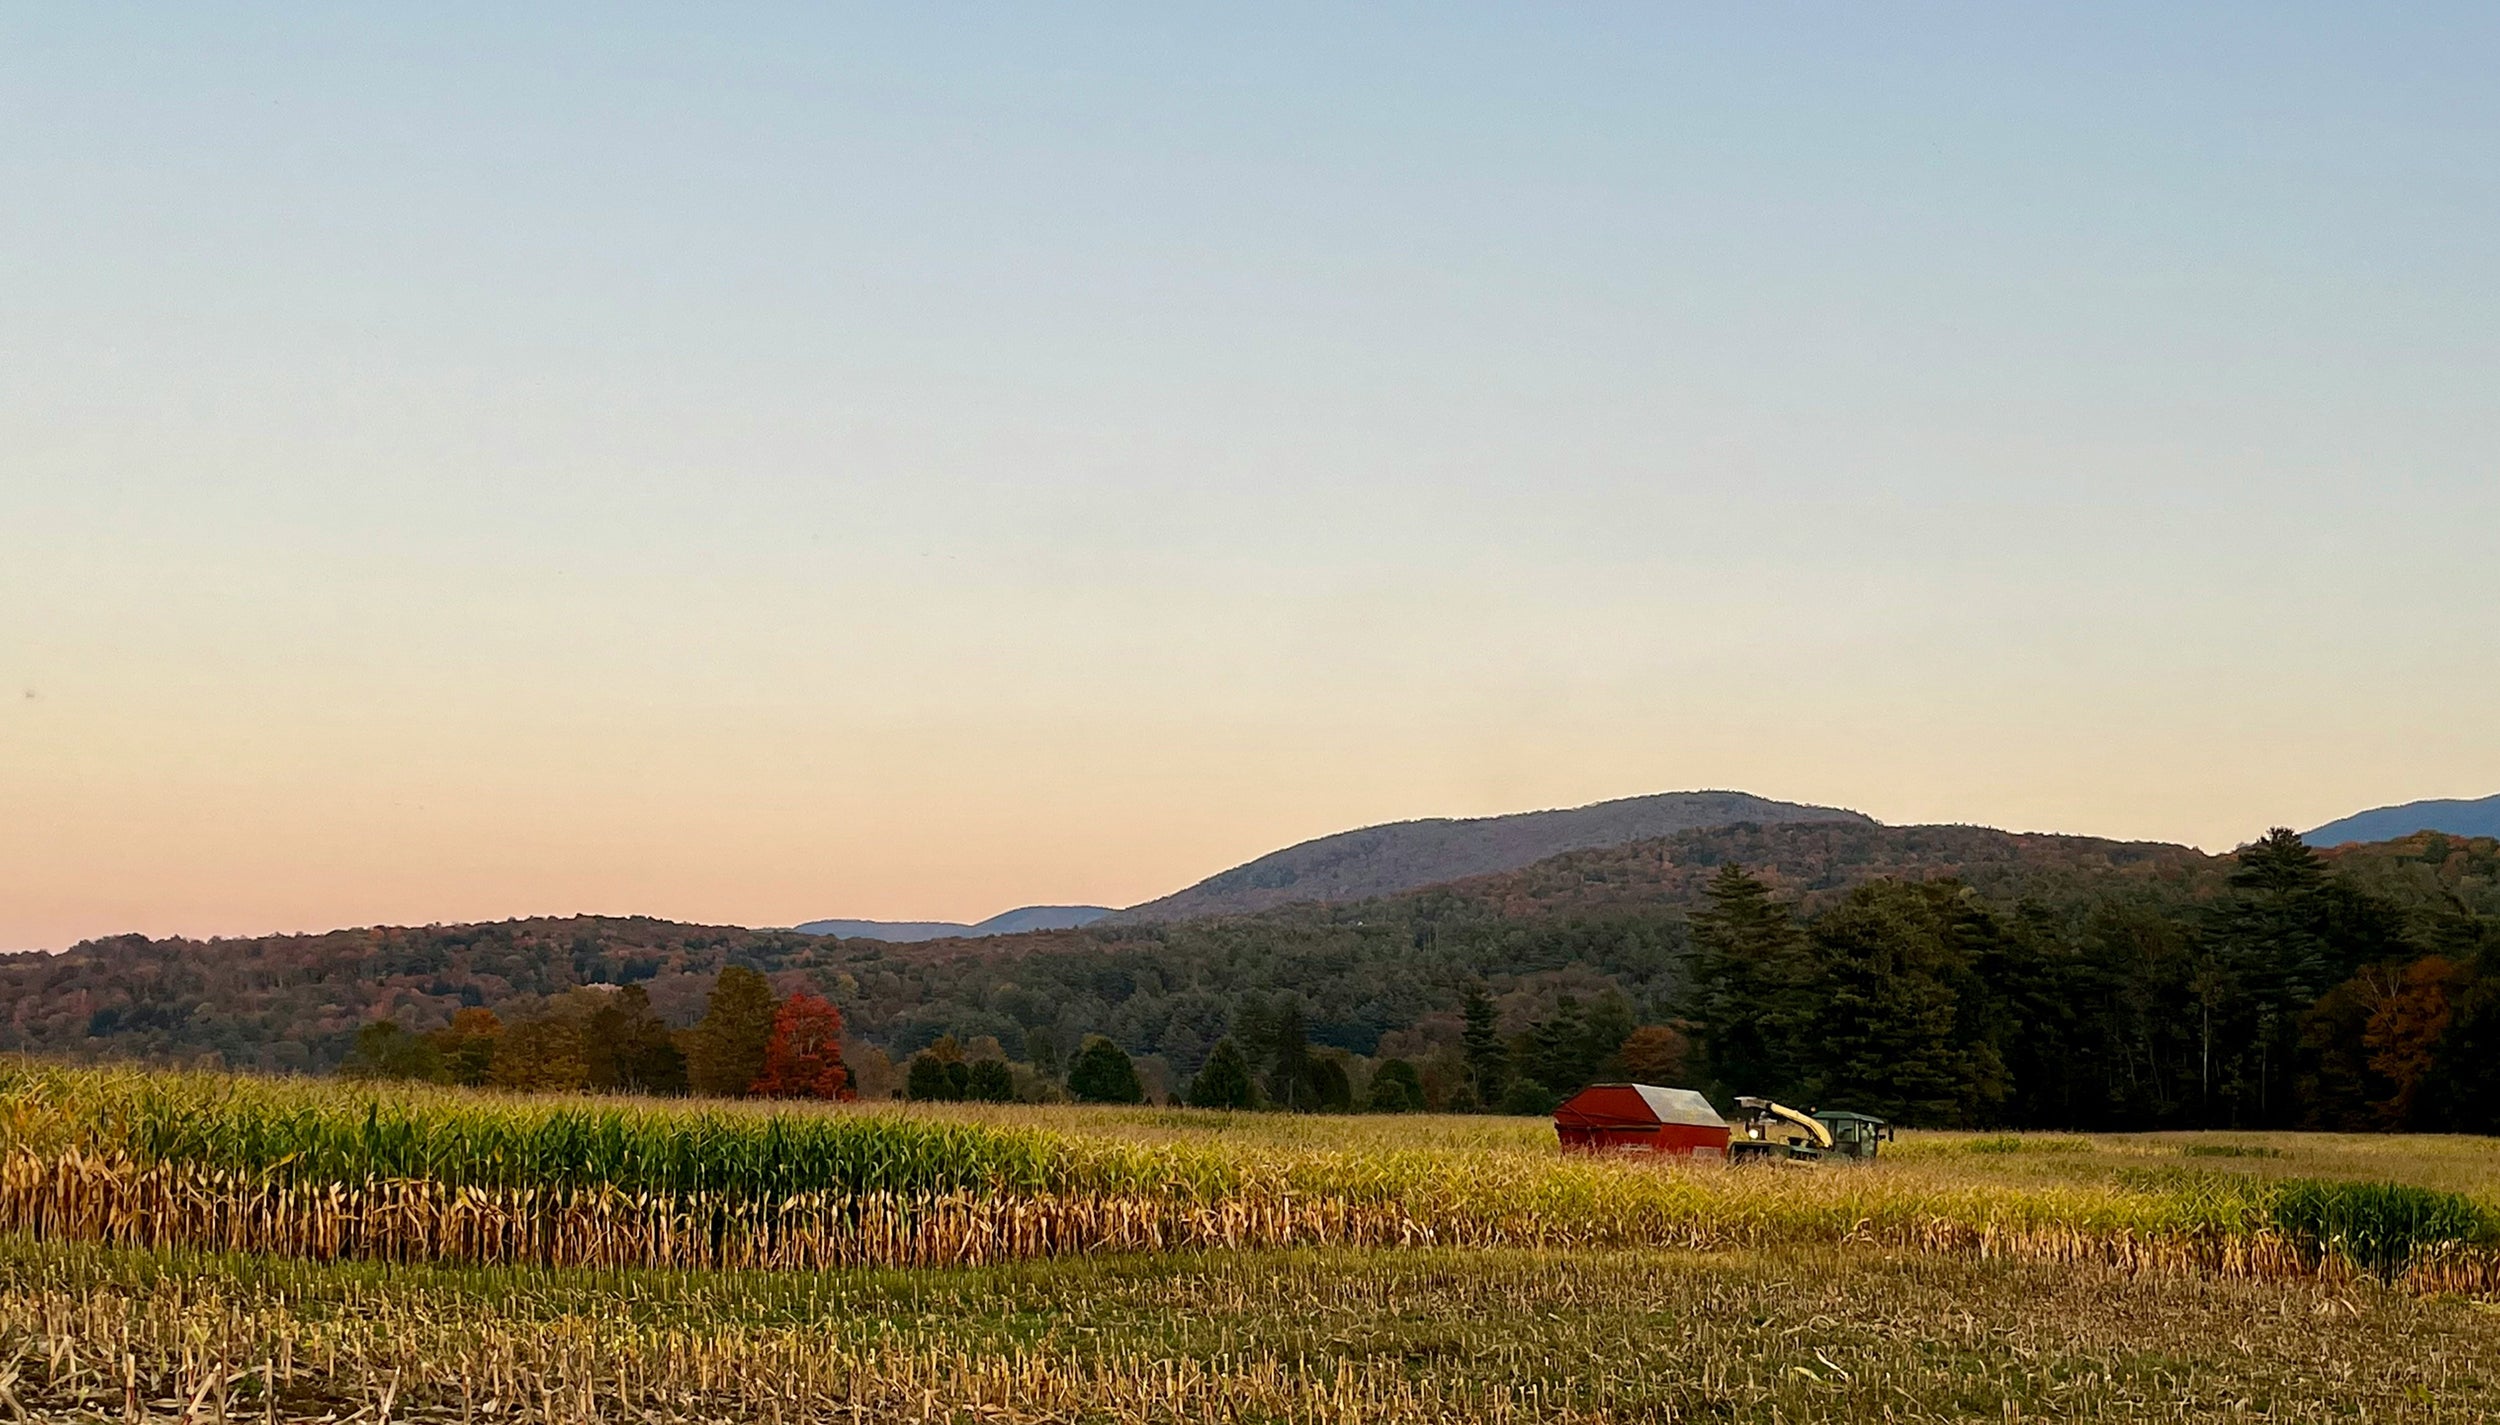 Red wagon in a field with Vermont mountains in the background